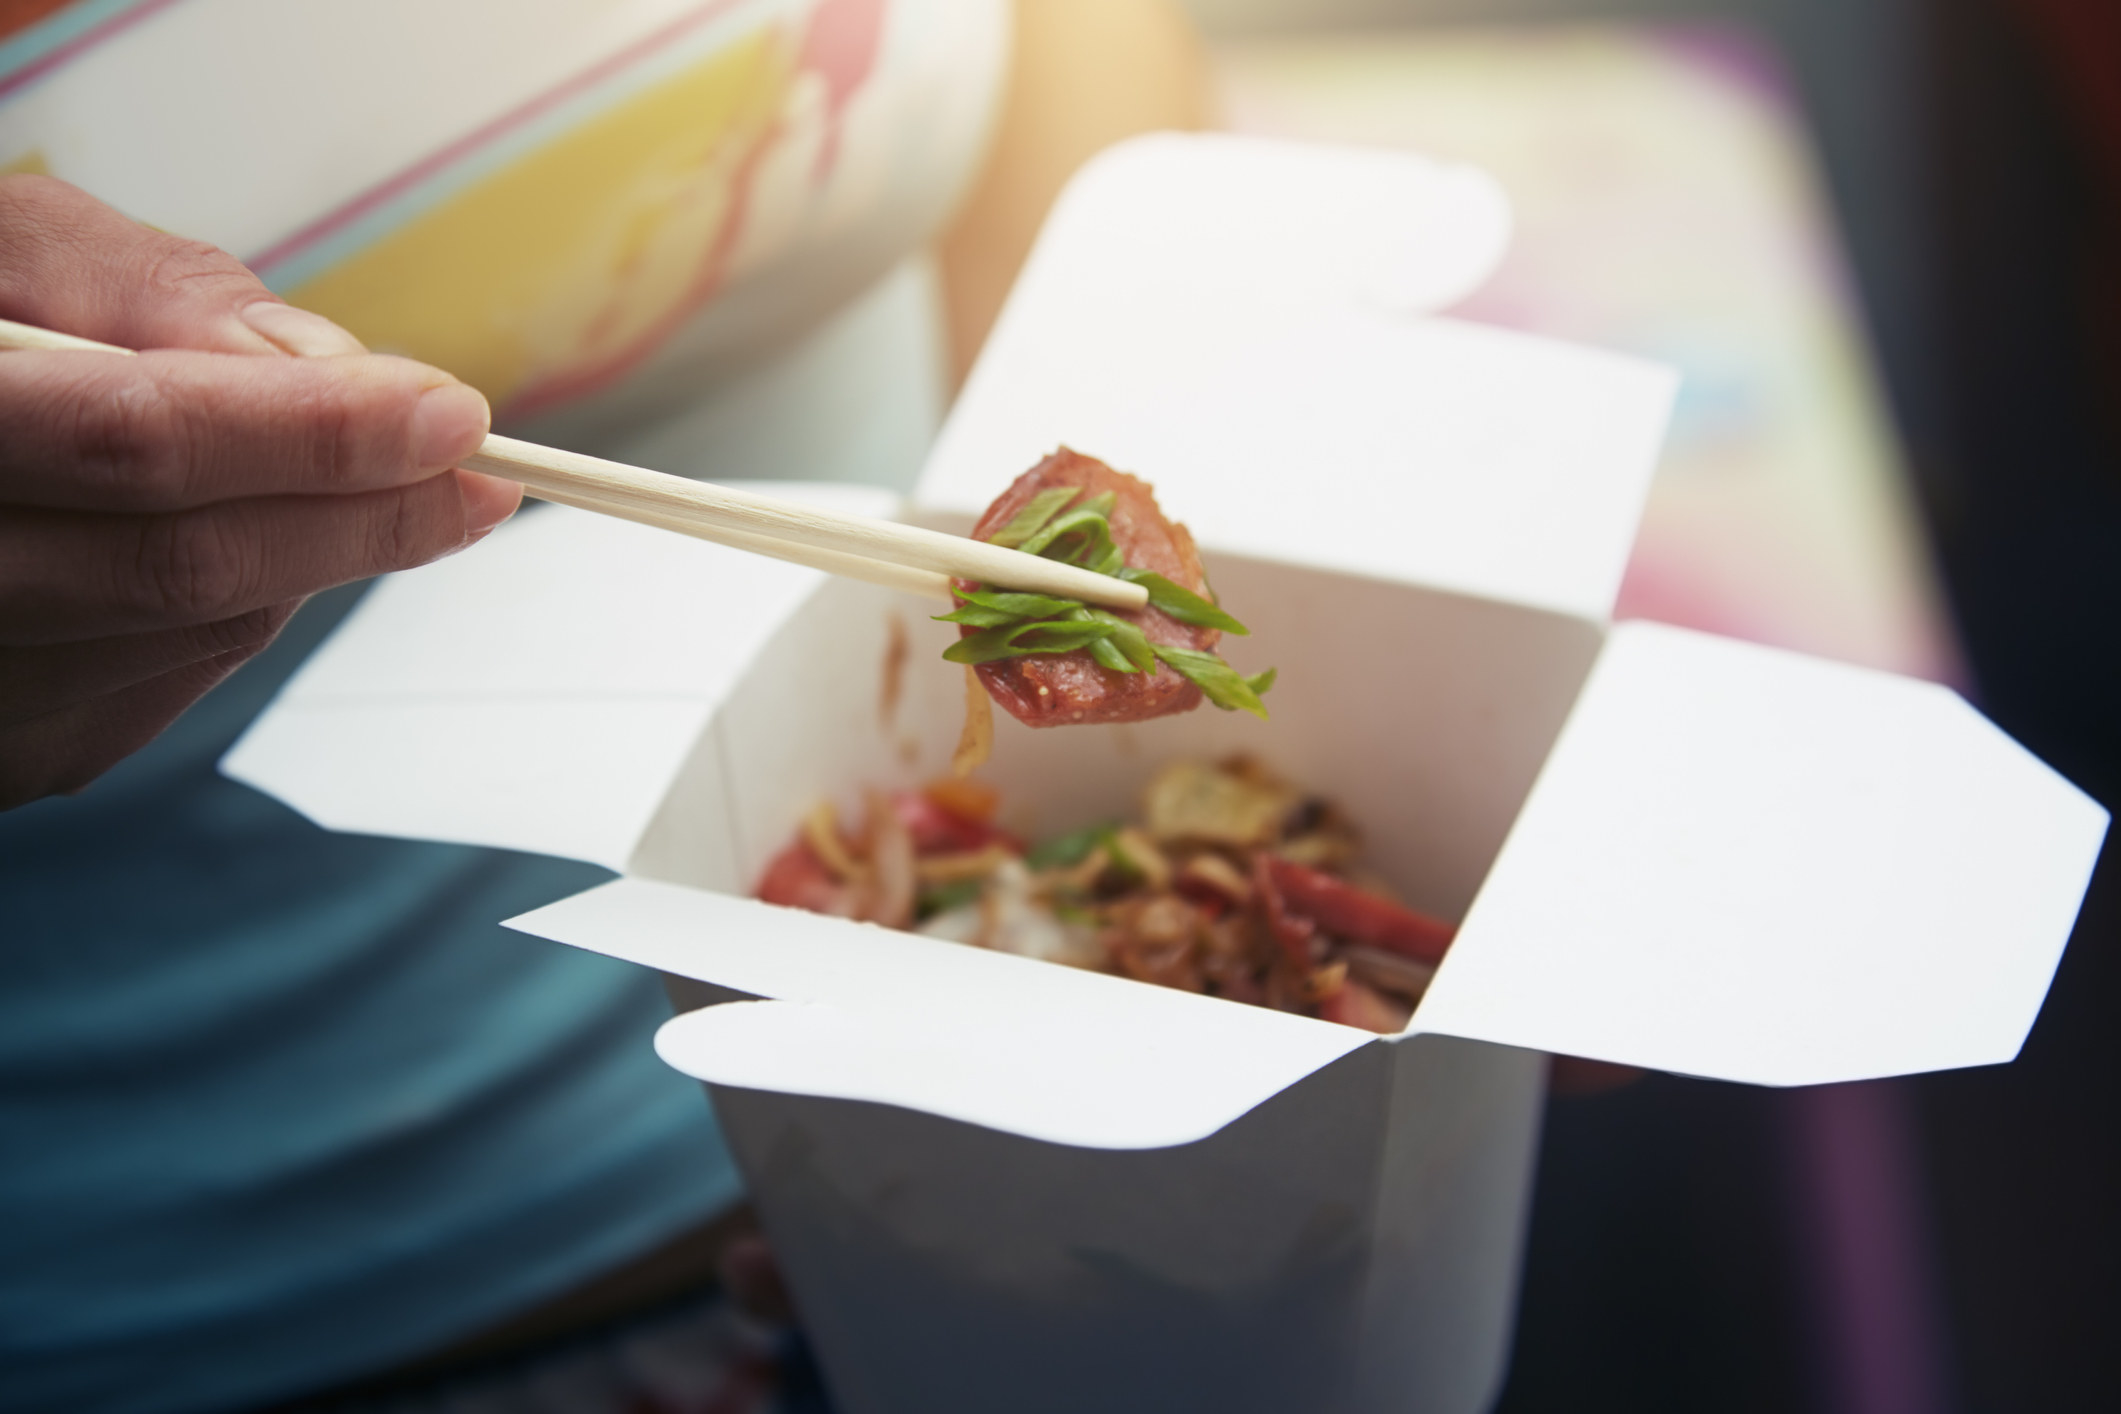 A woman eating Asian fast food from a cardboard box